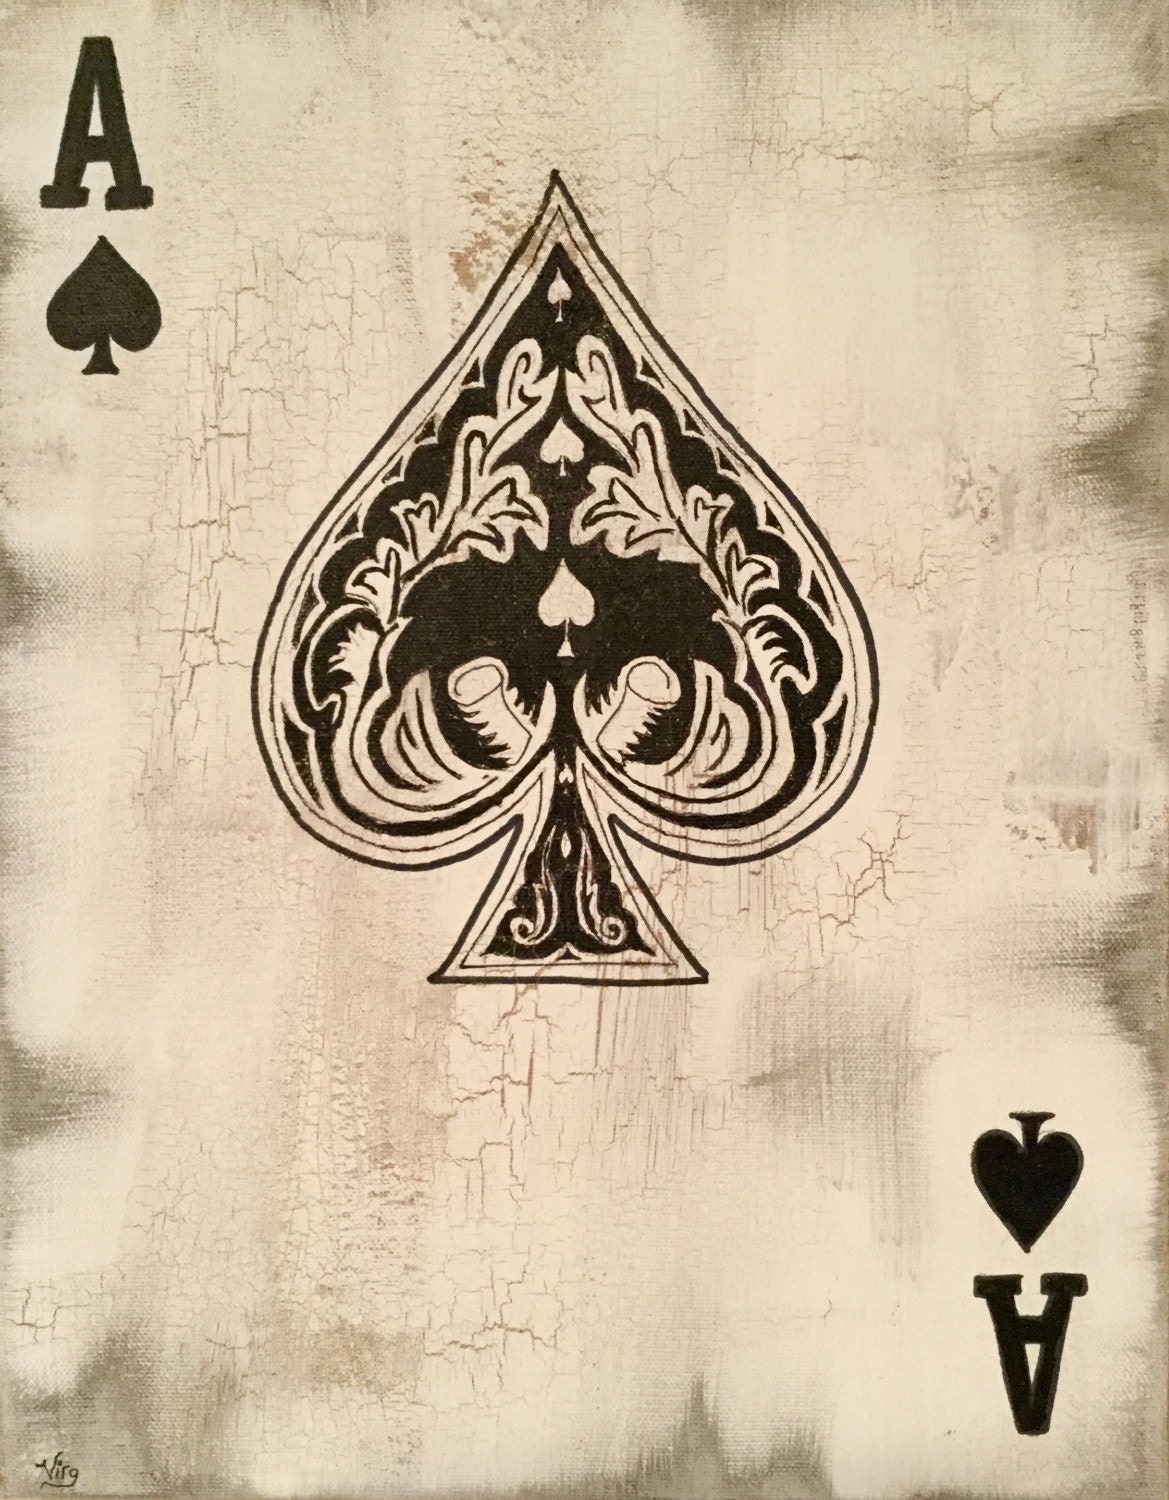 Blackjack Poker Las Vegas-CASINO PLAYING CARDS DECK-Collectible-CHOOSE ONE STYLE 